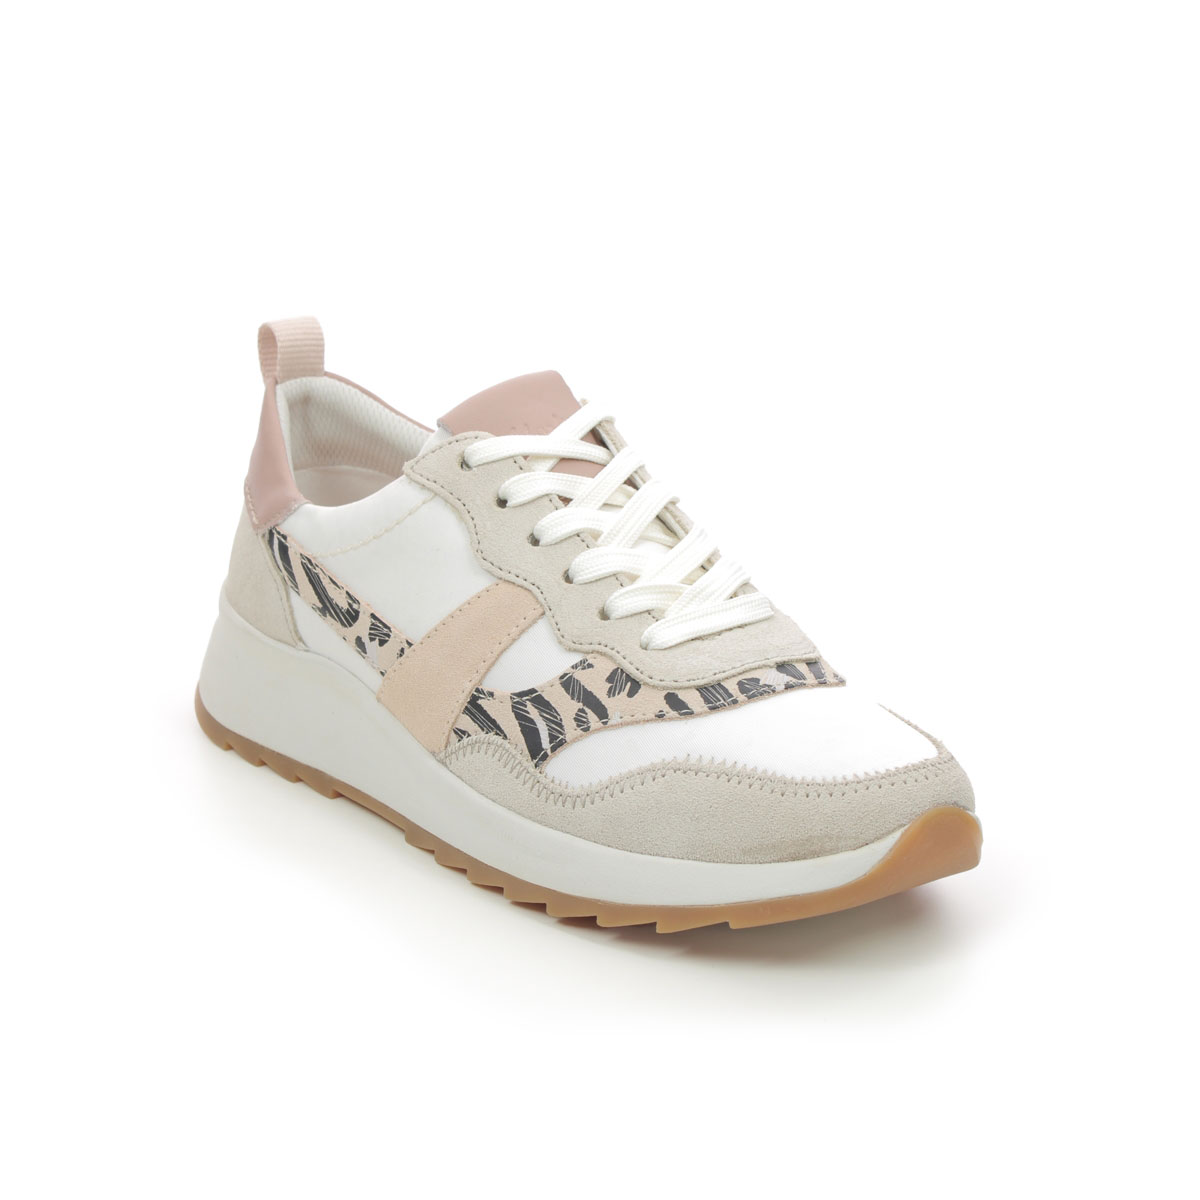 Clarks Dashlite Jazz White Pink Womens Trainers 704294D In Size 4.5 In Plain White Pink